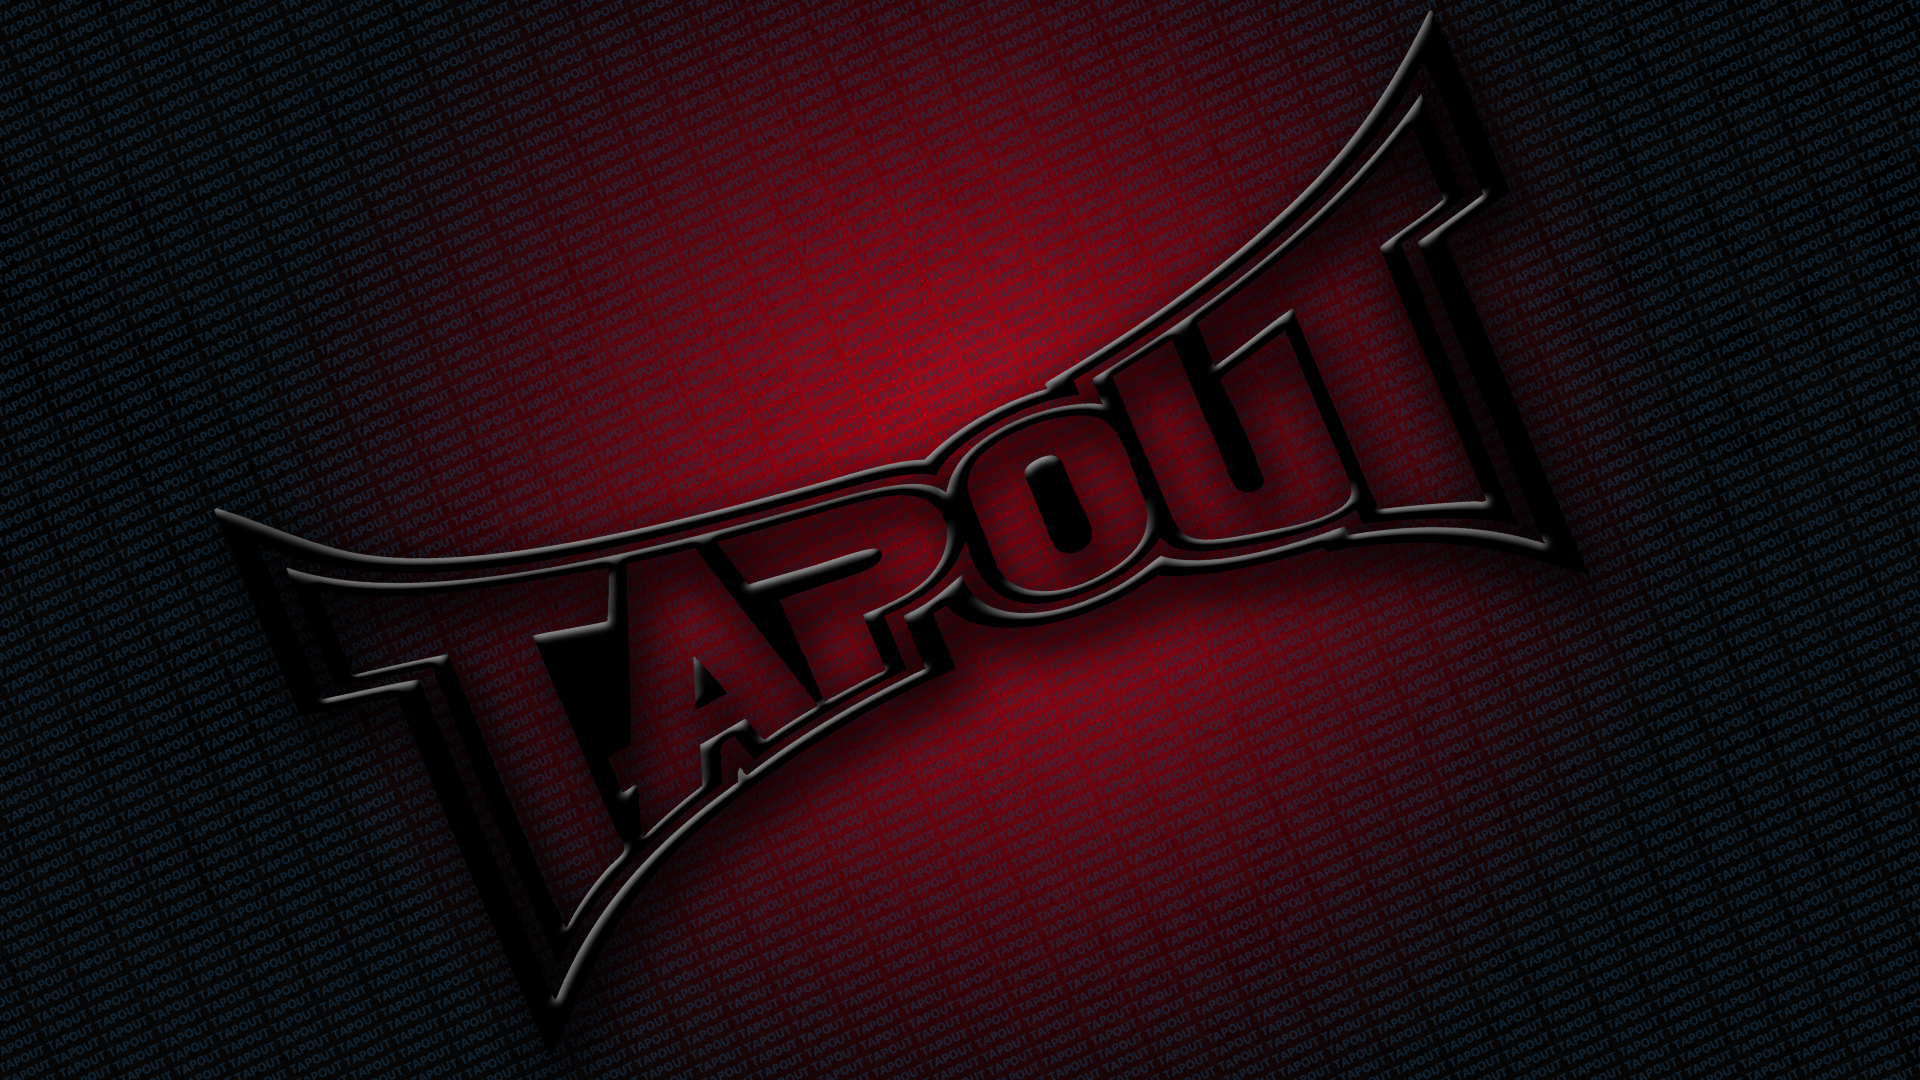 Black Tapout Logo Angled Tapout Small Print Red Grunge Background